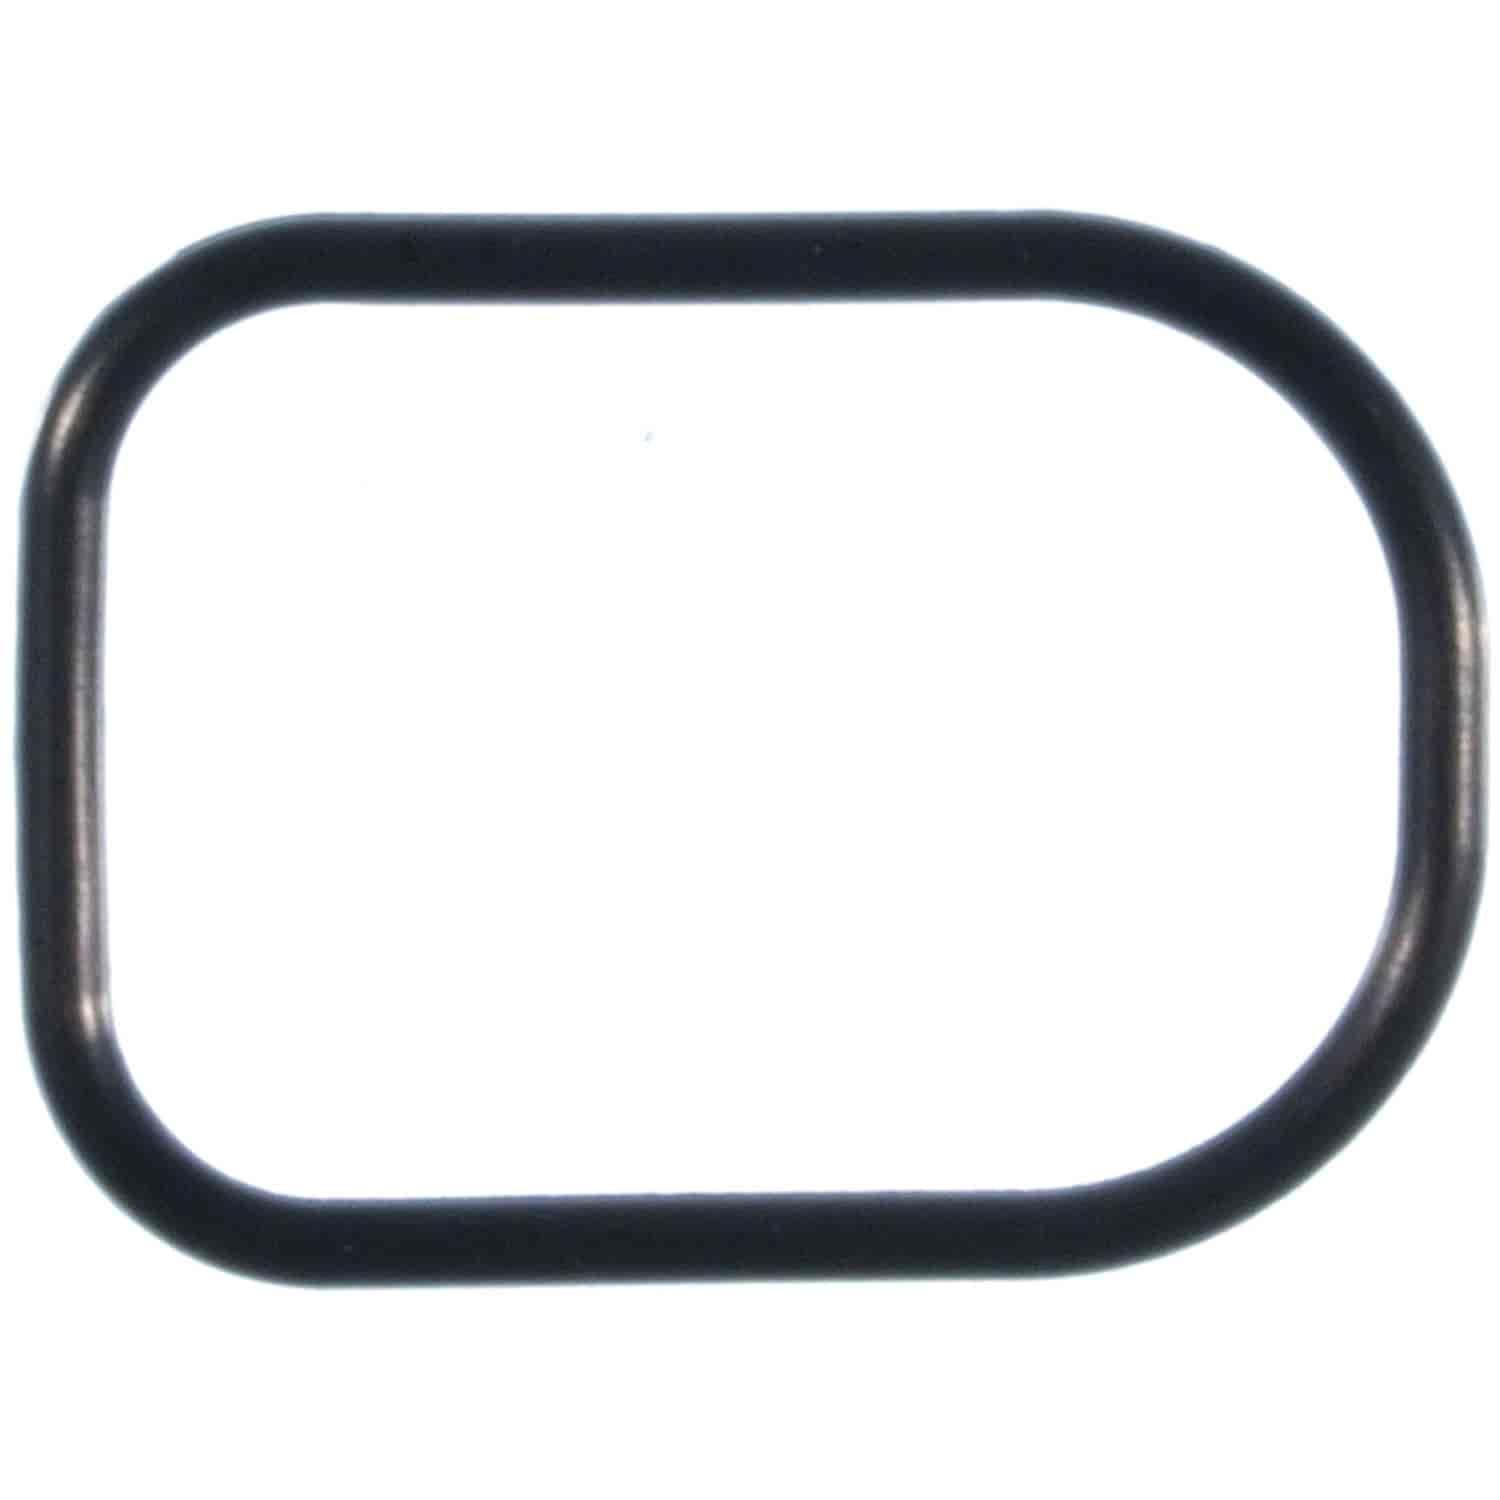 Water Outlet Gasket Mazda 2006-2010 2.0L 2000CC MX-5 Miata Engines